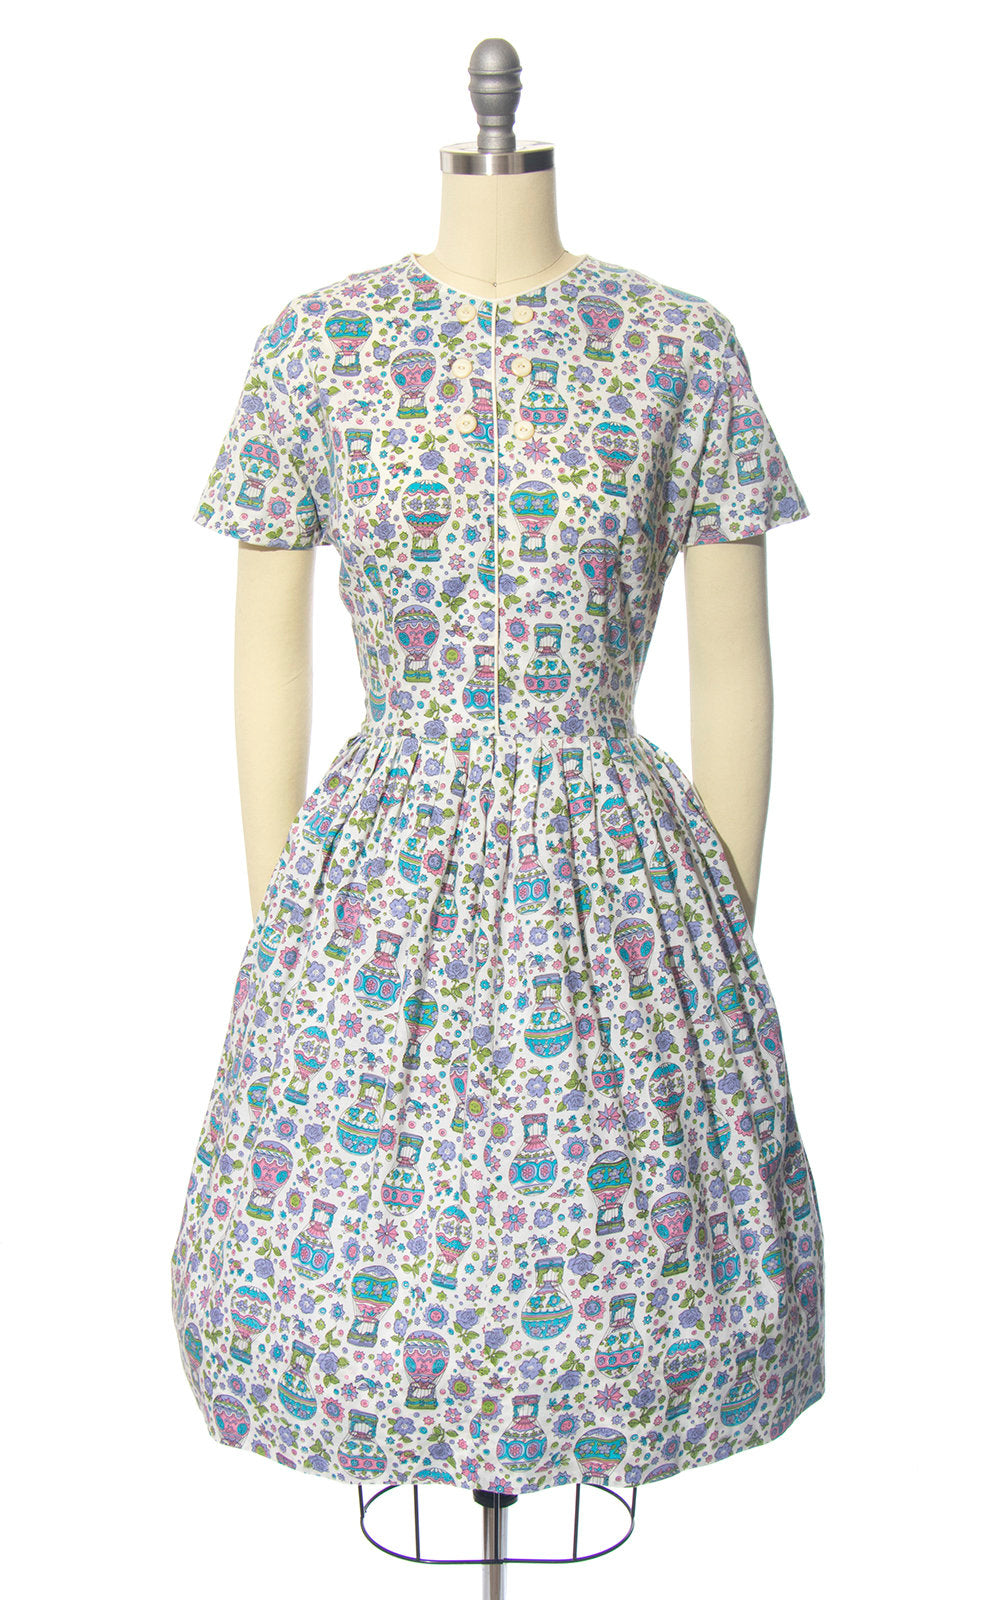 Vintage 1950s Dress | 50s MODE O&#39; DAY Novelty Print Cotton Hot Air Balloon Rose Floral White Full Skirt Day Dress (small/medium)